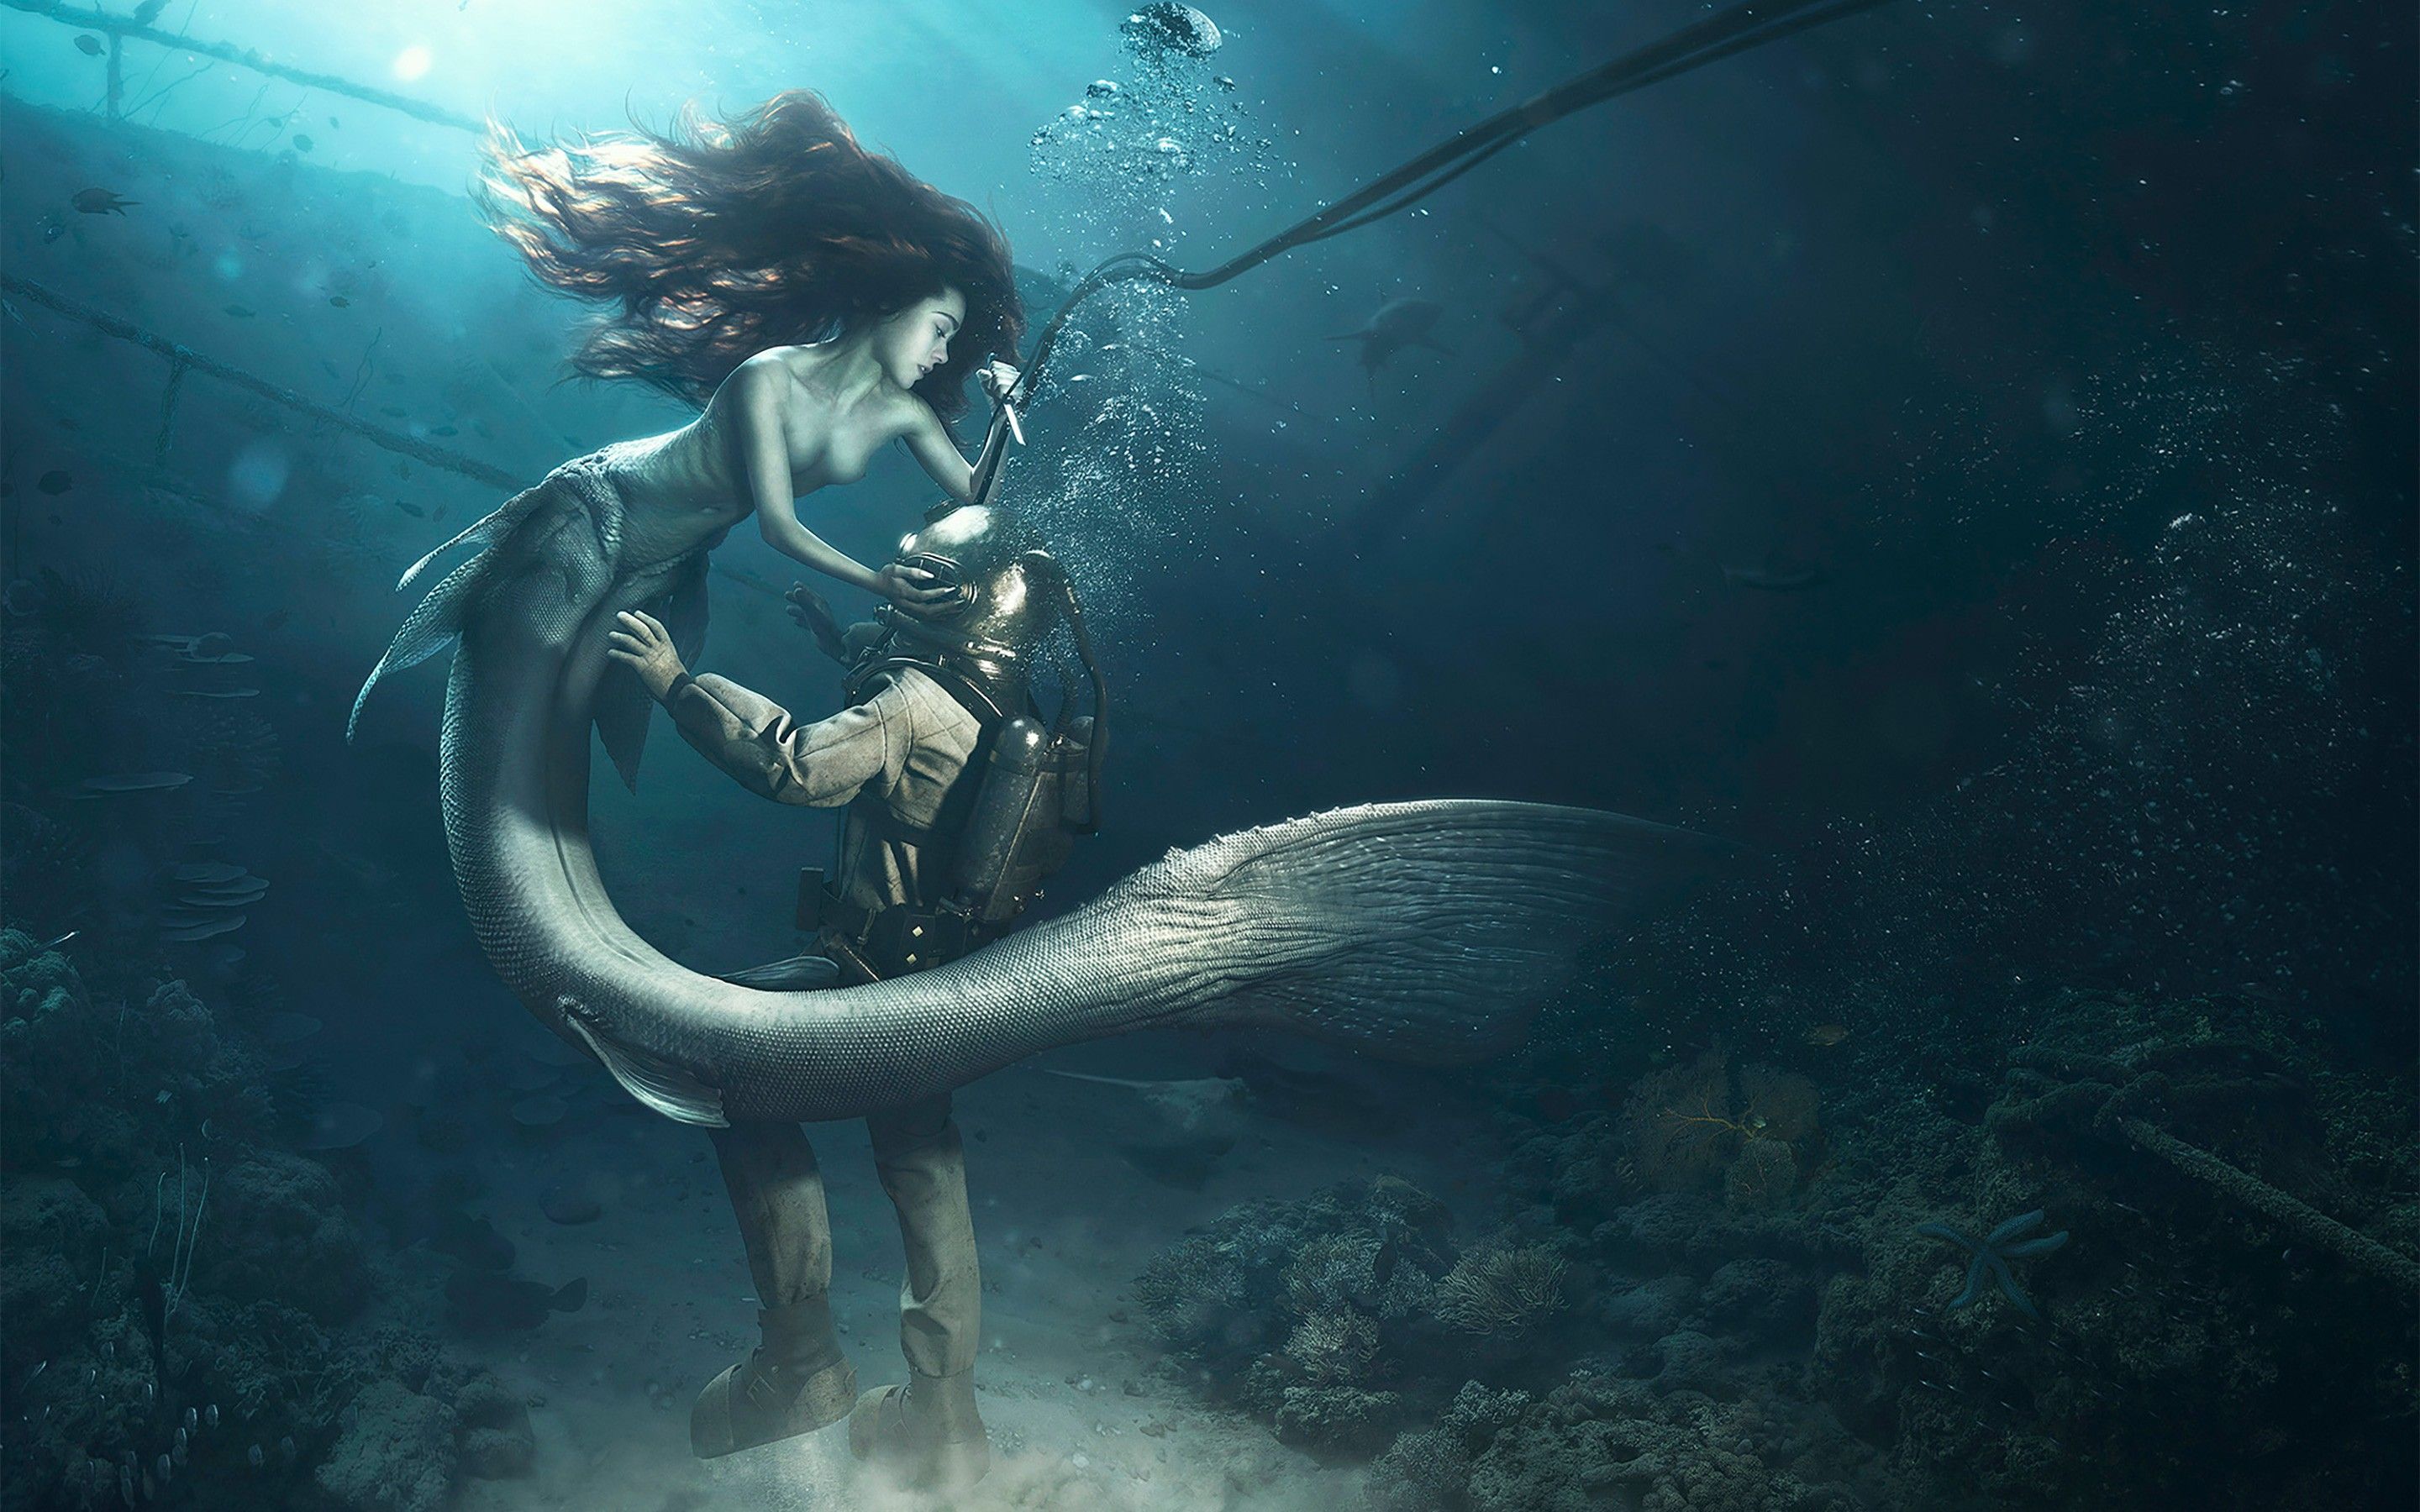 Diver and The mermaid [2880x1800]